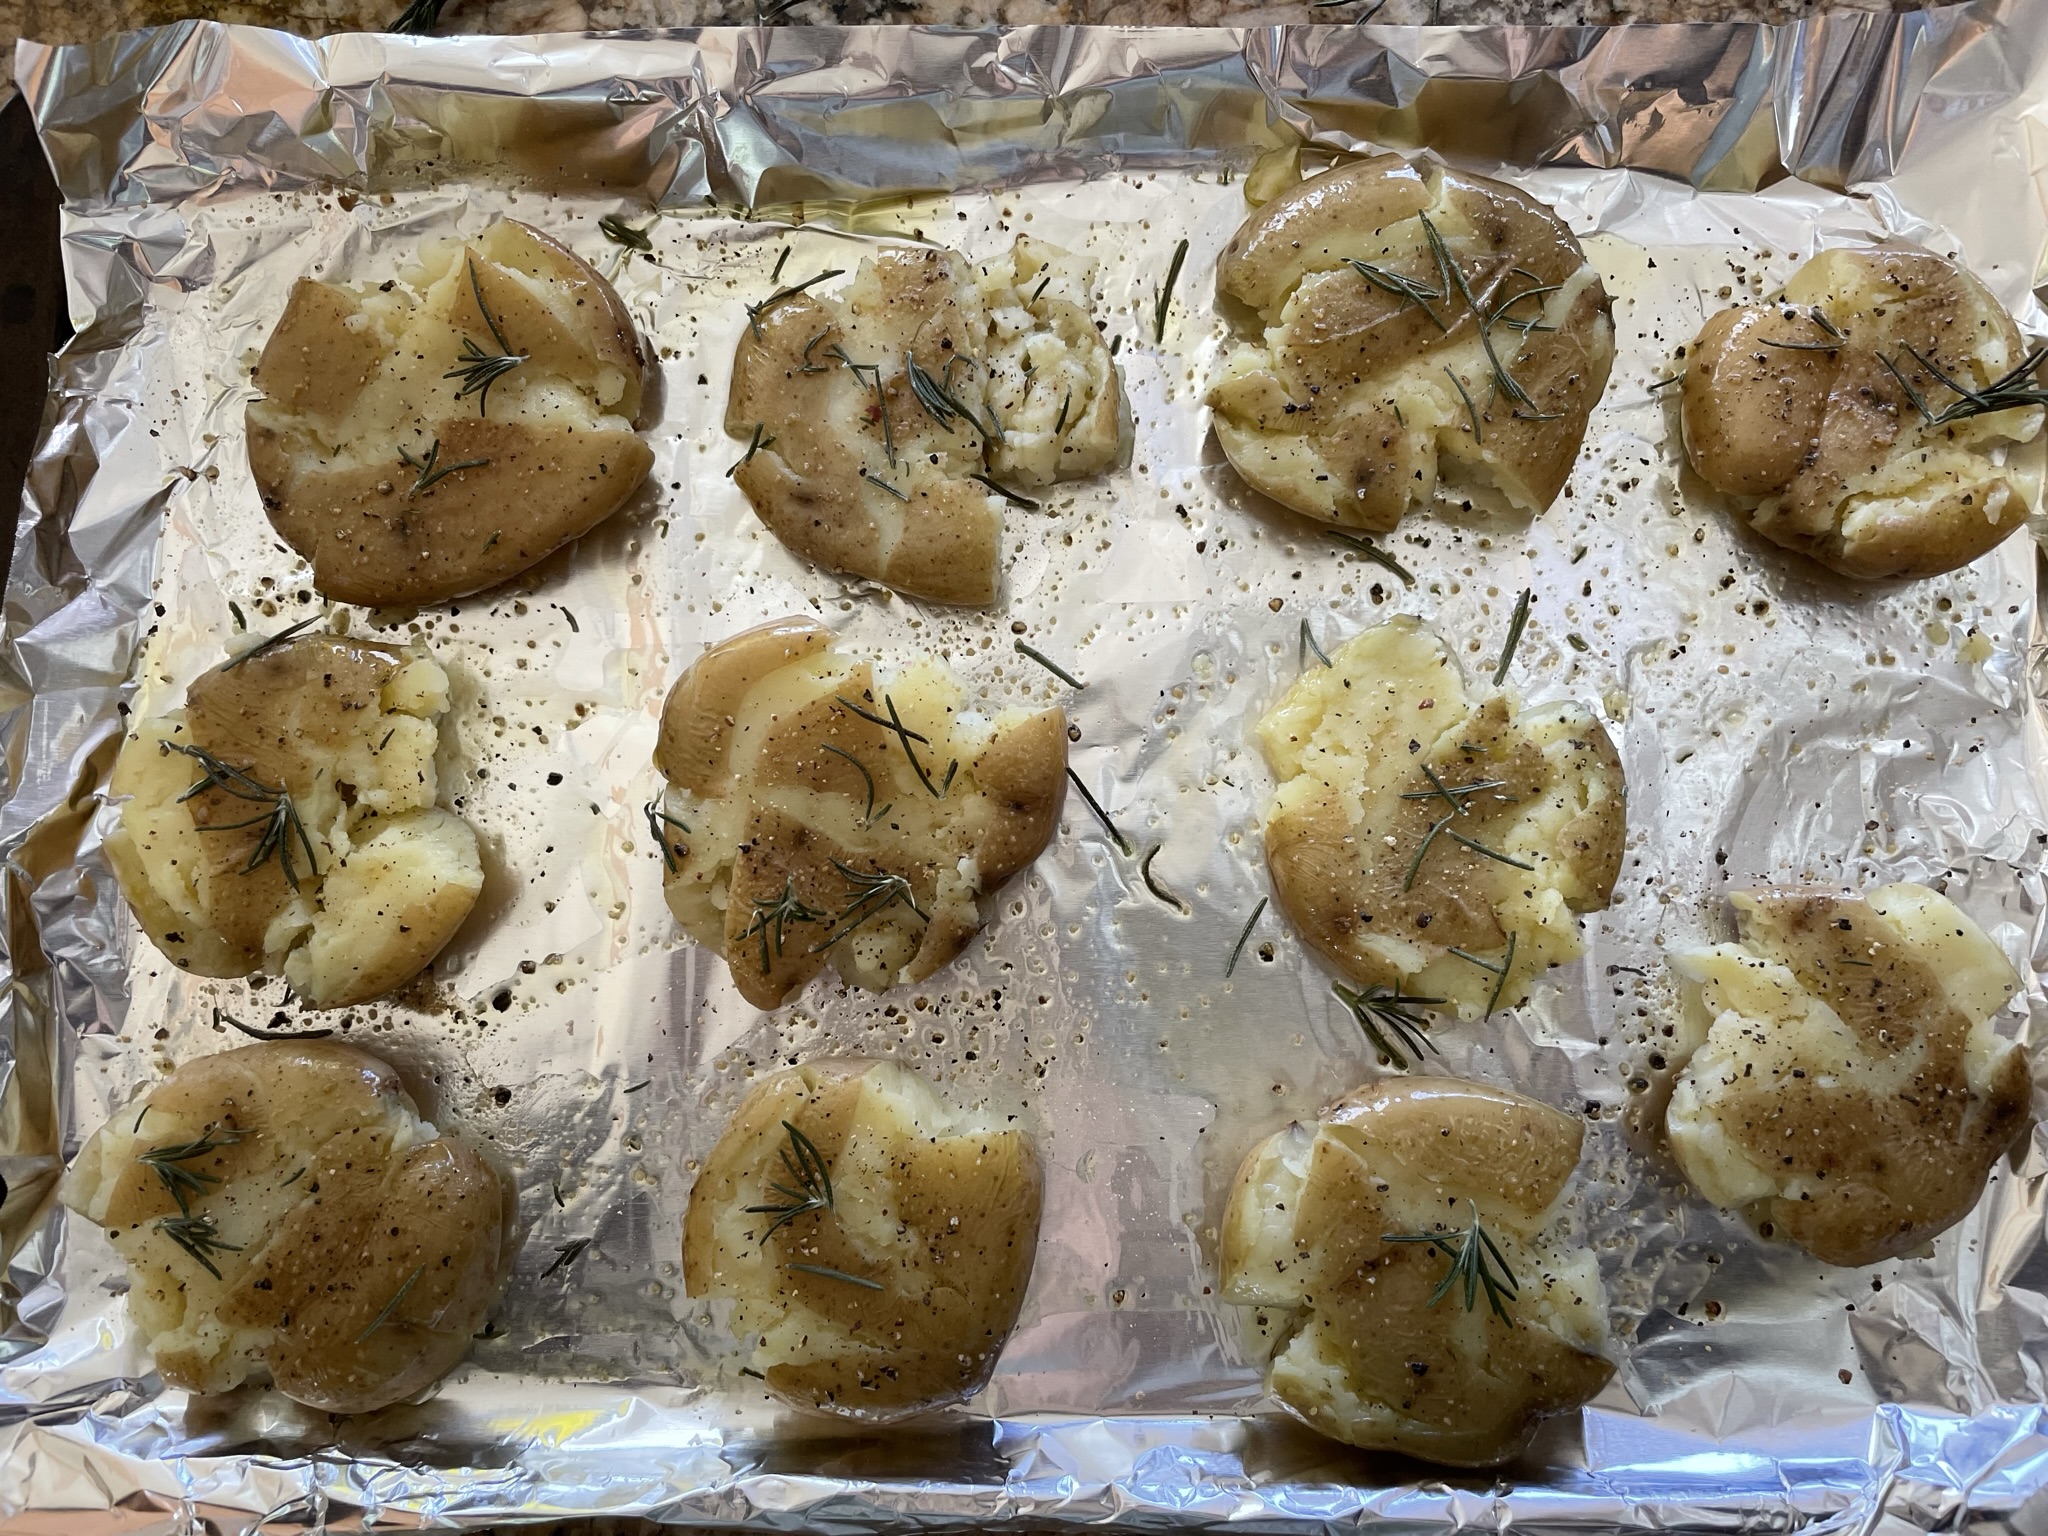 Smashed potatoes before broiling